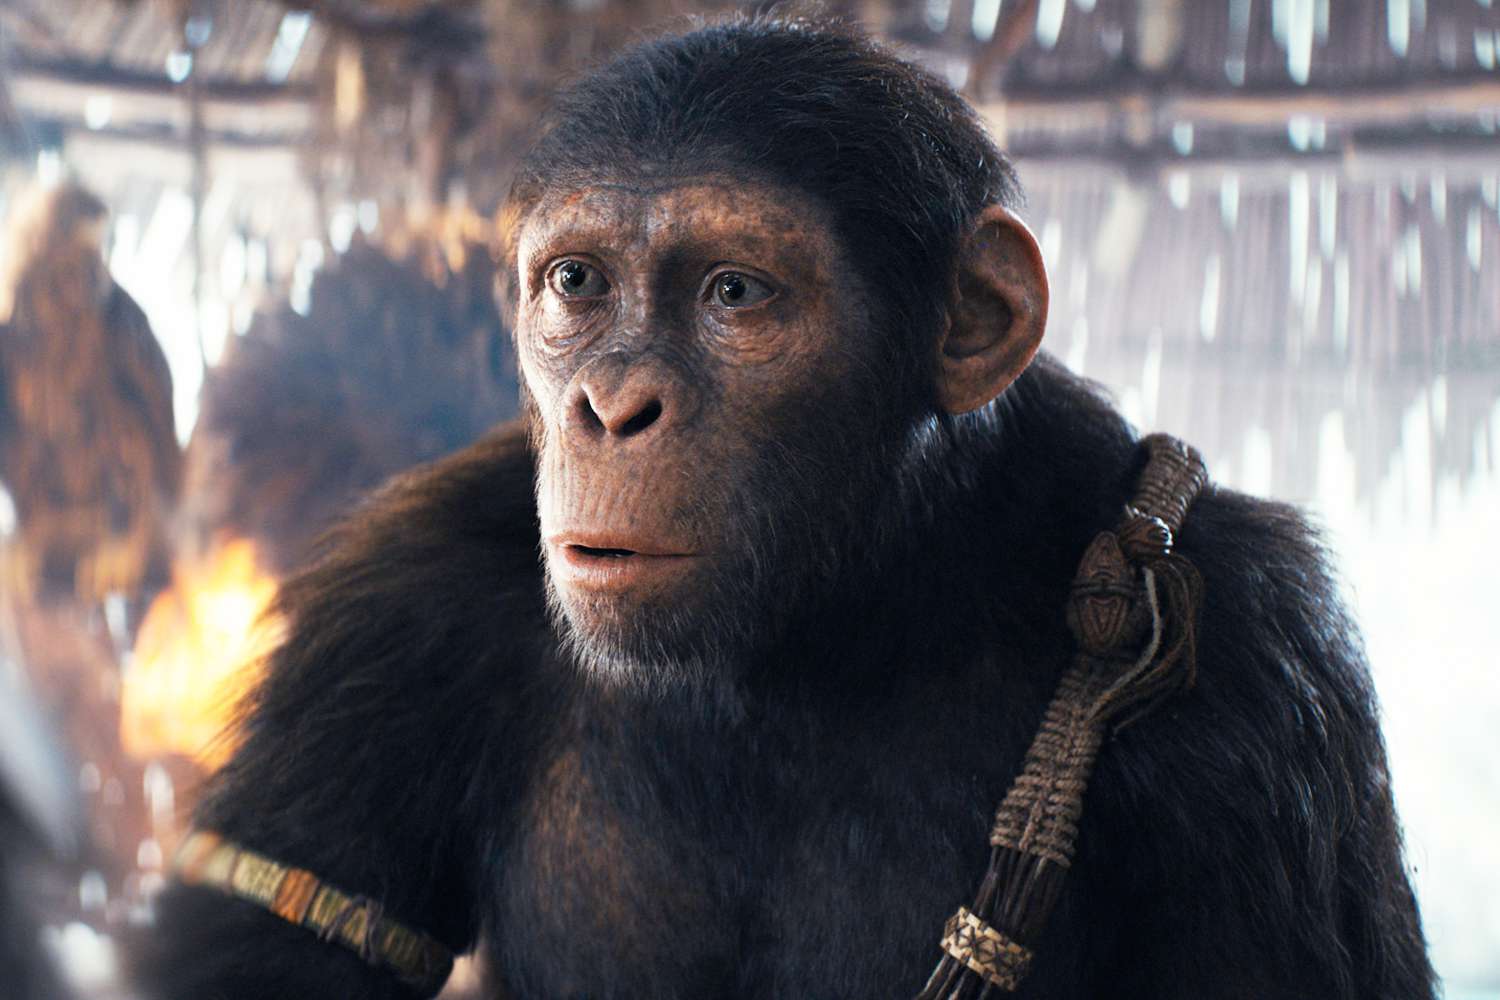 Noa (played by Owen Teague) in 20th Century Studios' KINGDOM OF THE PLANET OF THE APES. Photo courtesy of 20th Century Studios